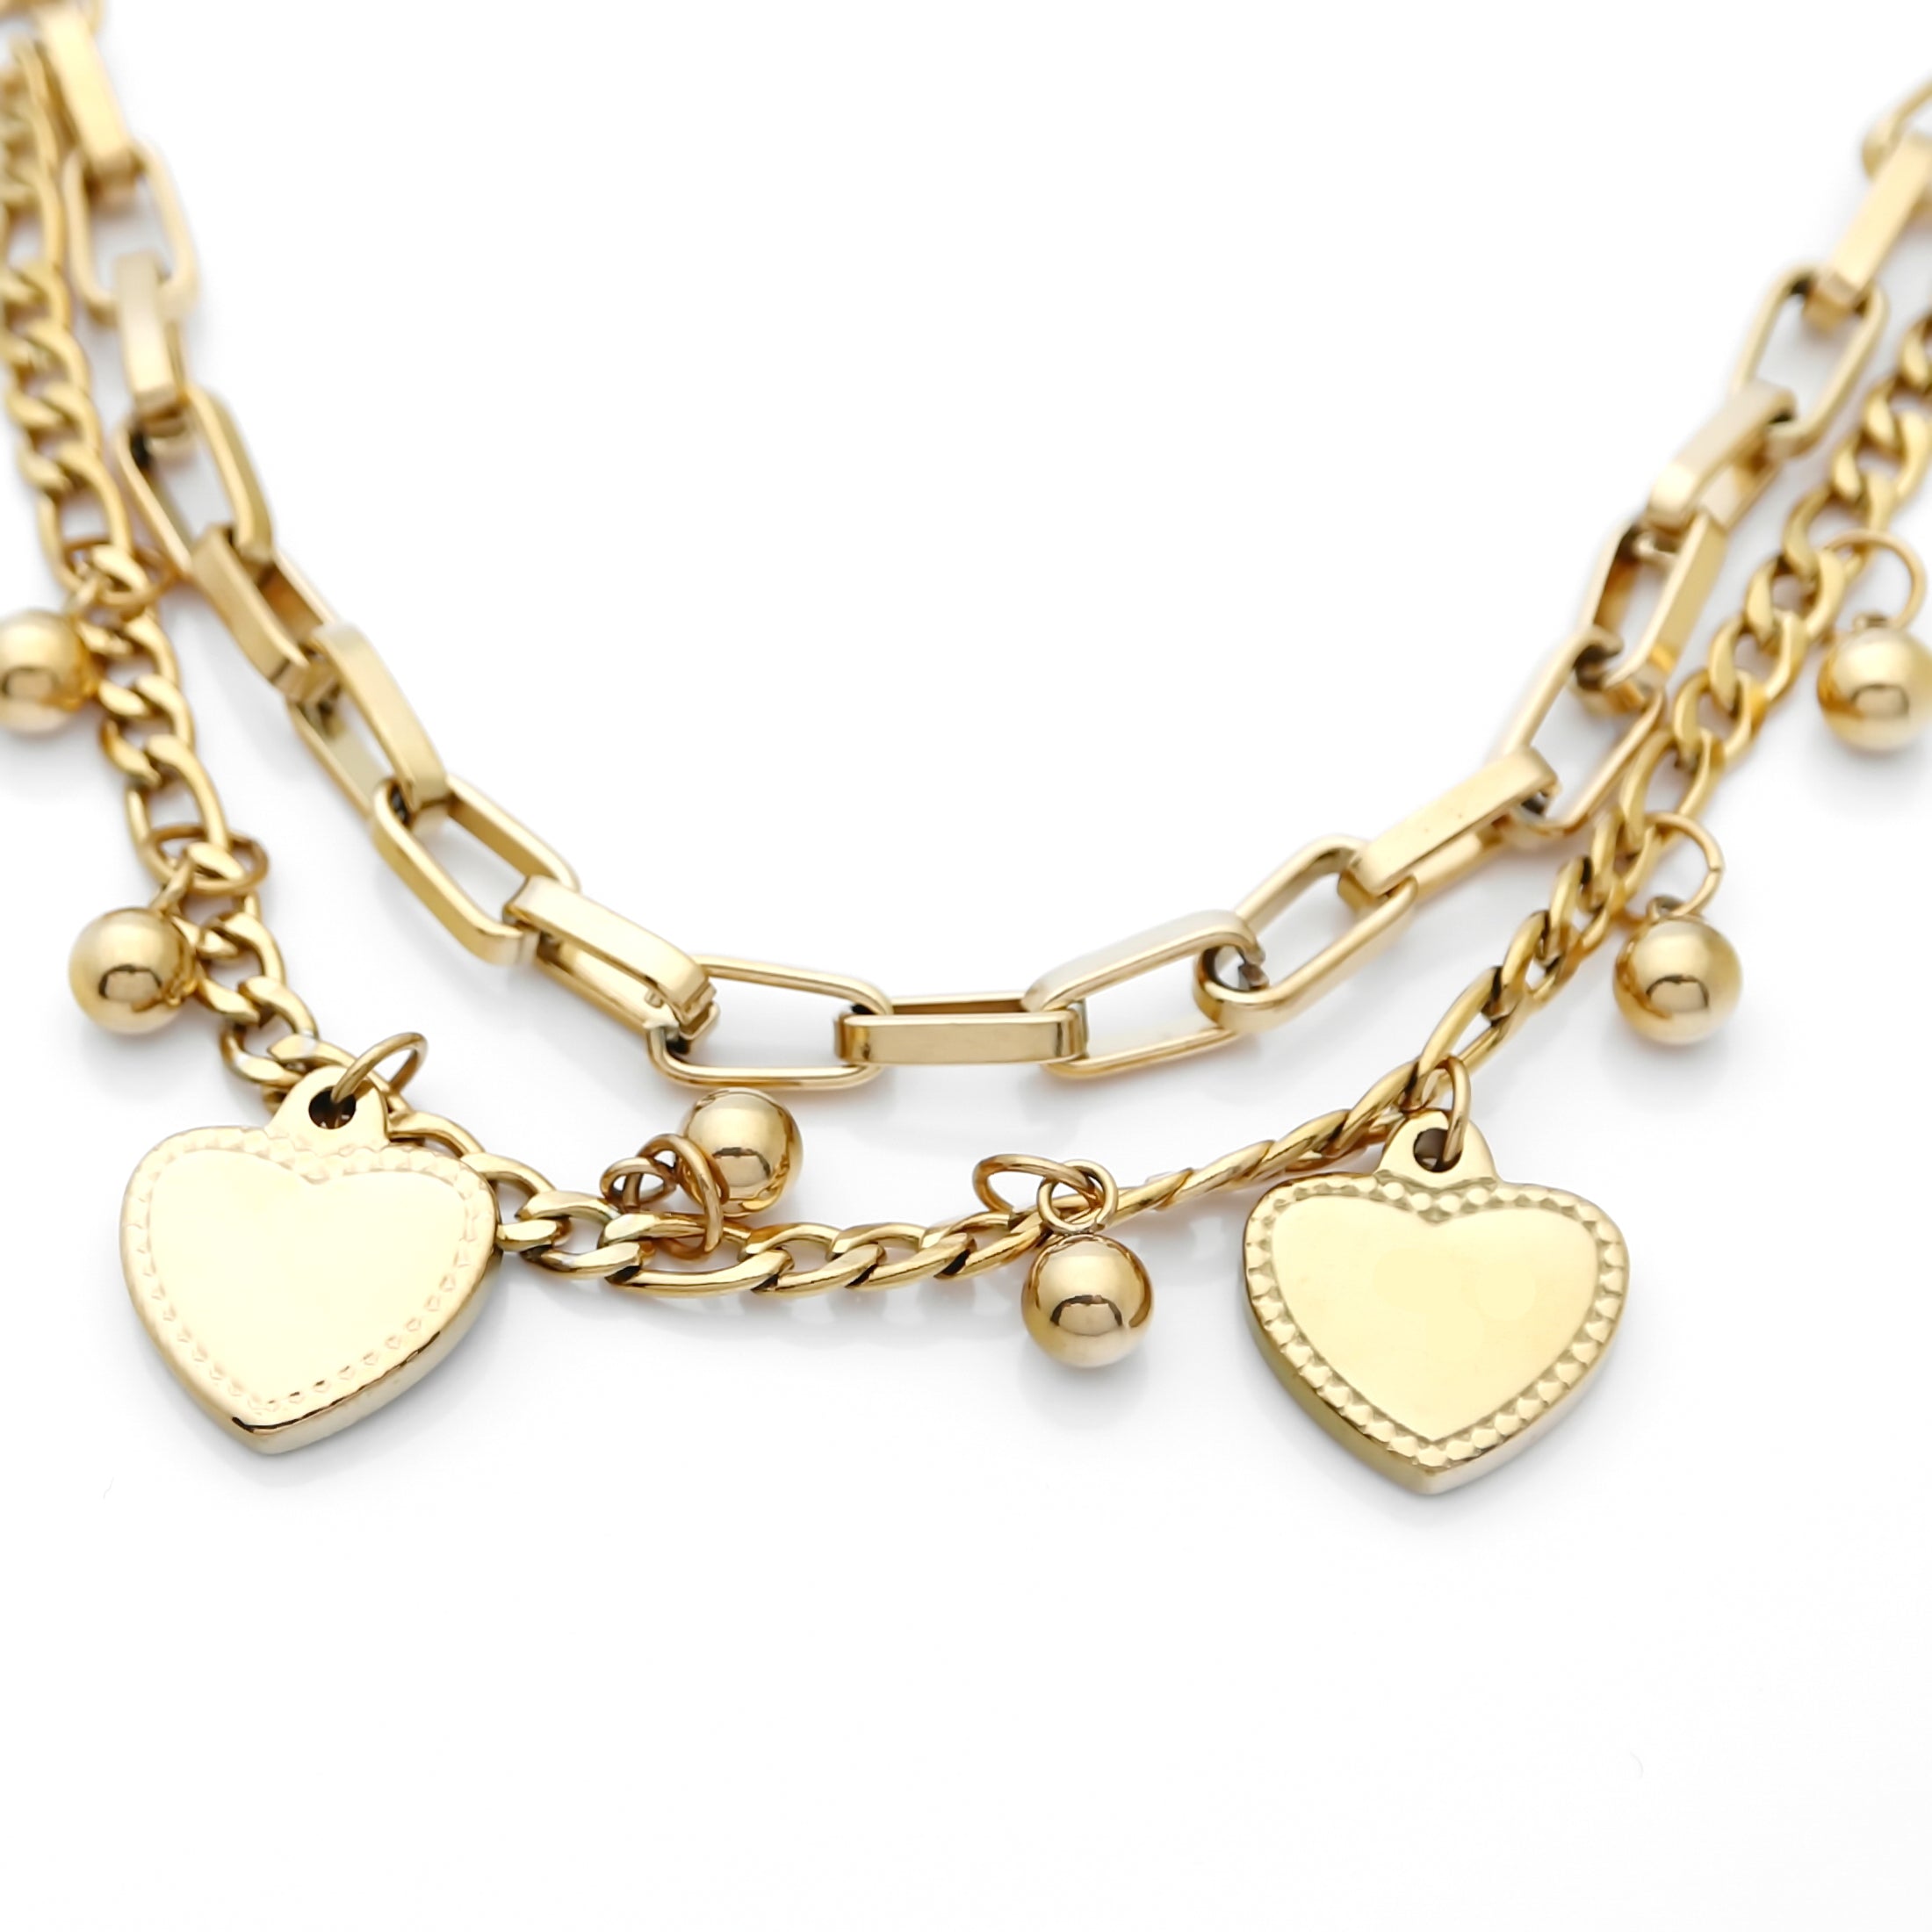 Double Layered Women's Bracelet with Dangle Heart Charms - Gold-Bracelets, Jewellery, Stainless Steel, Stainless Steel Bracelet, Women's Bracelet, Women's Jewellery-sb0074-g-2-Glitters